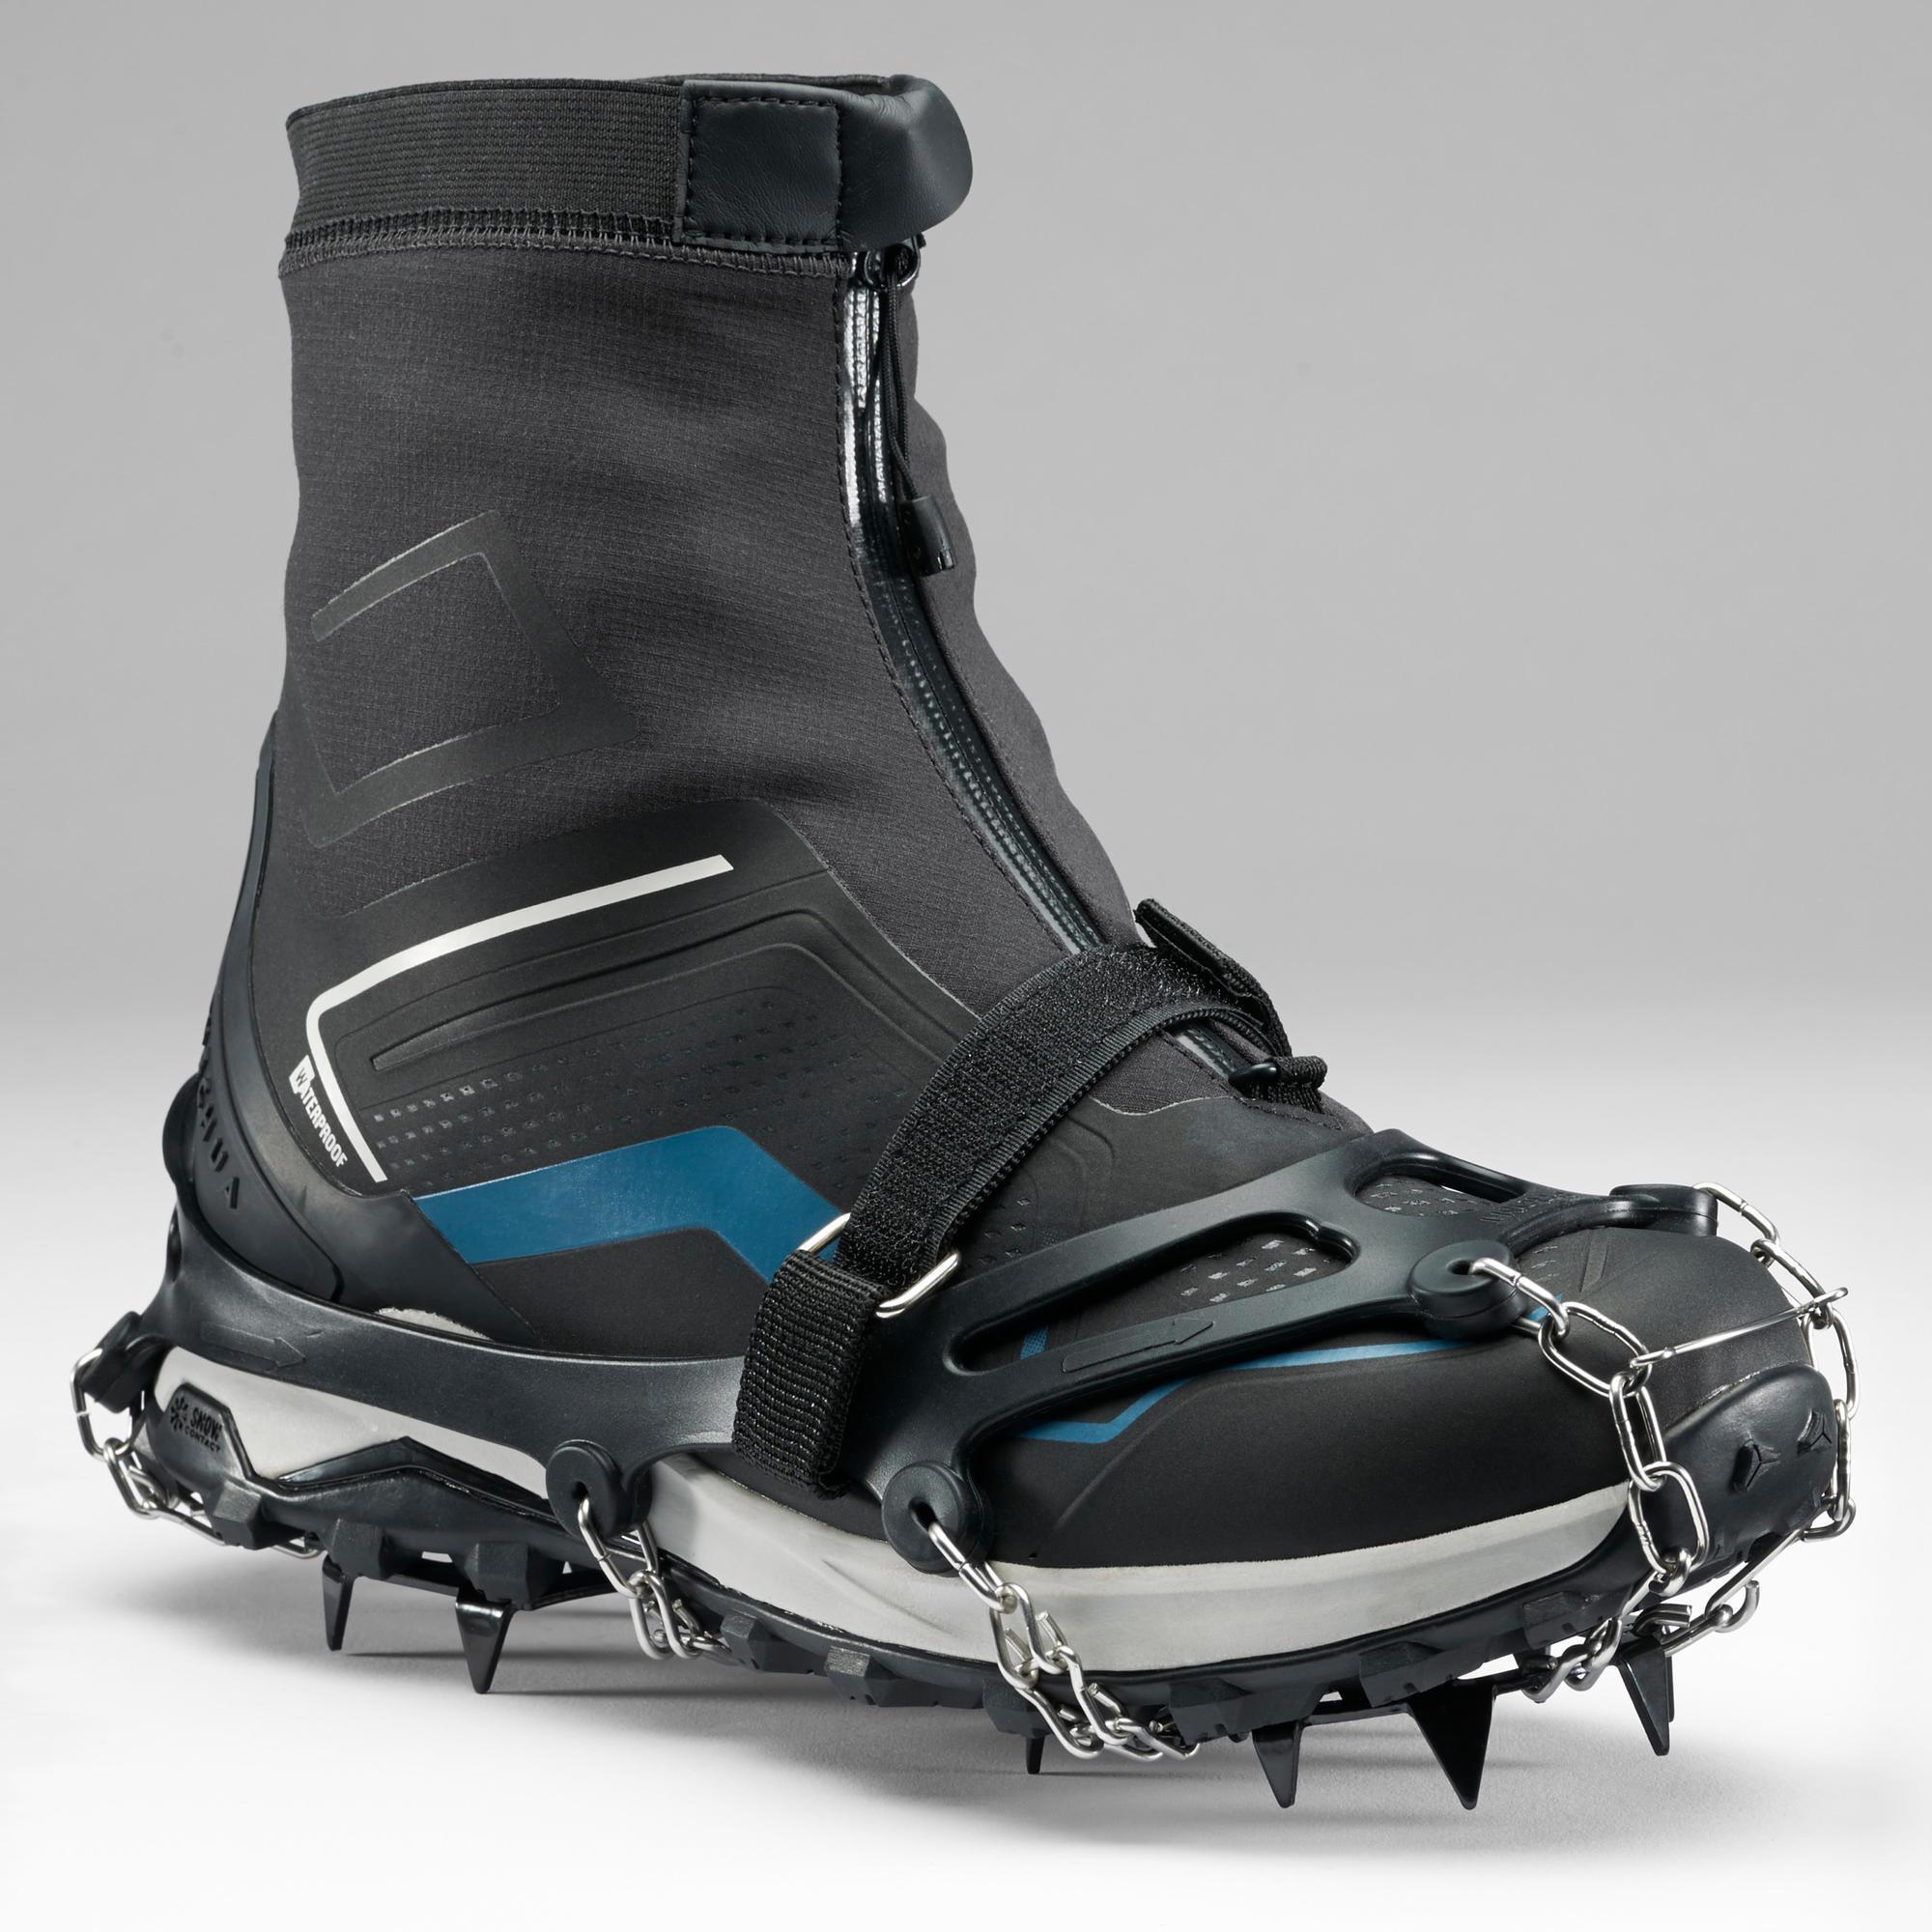 ADULT SNOW SHOES - SH900 - S TO XL 2/11